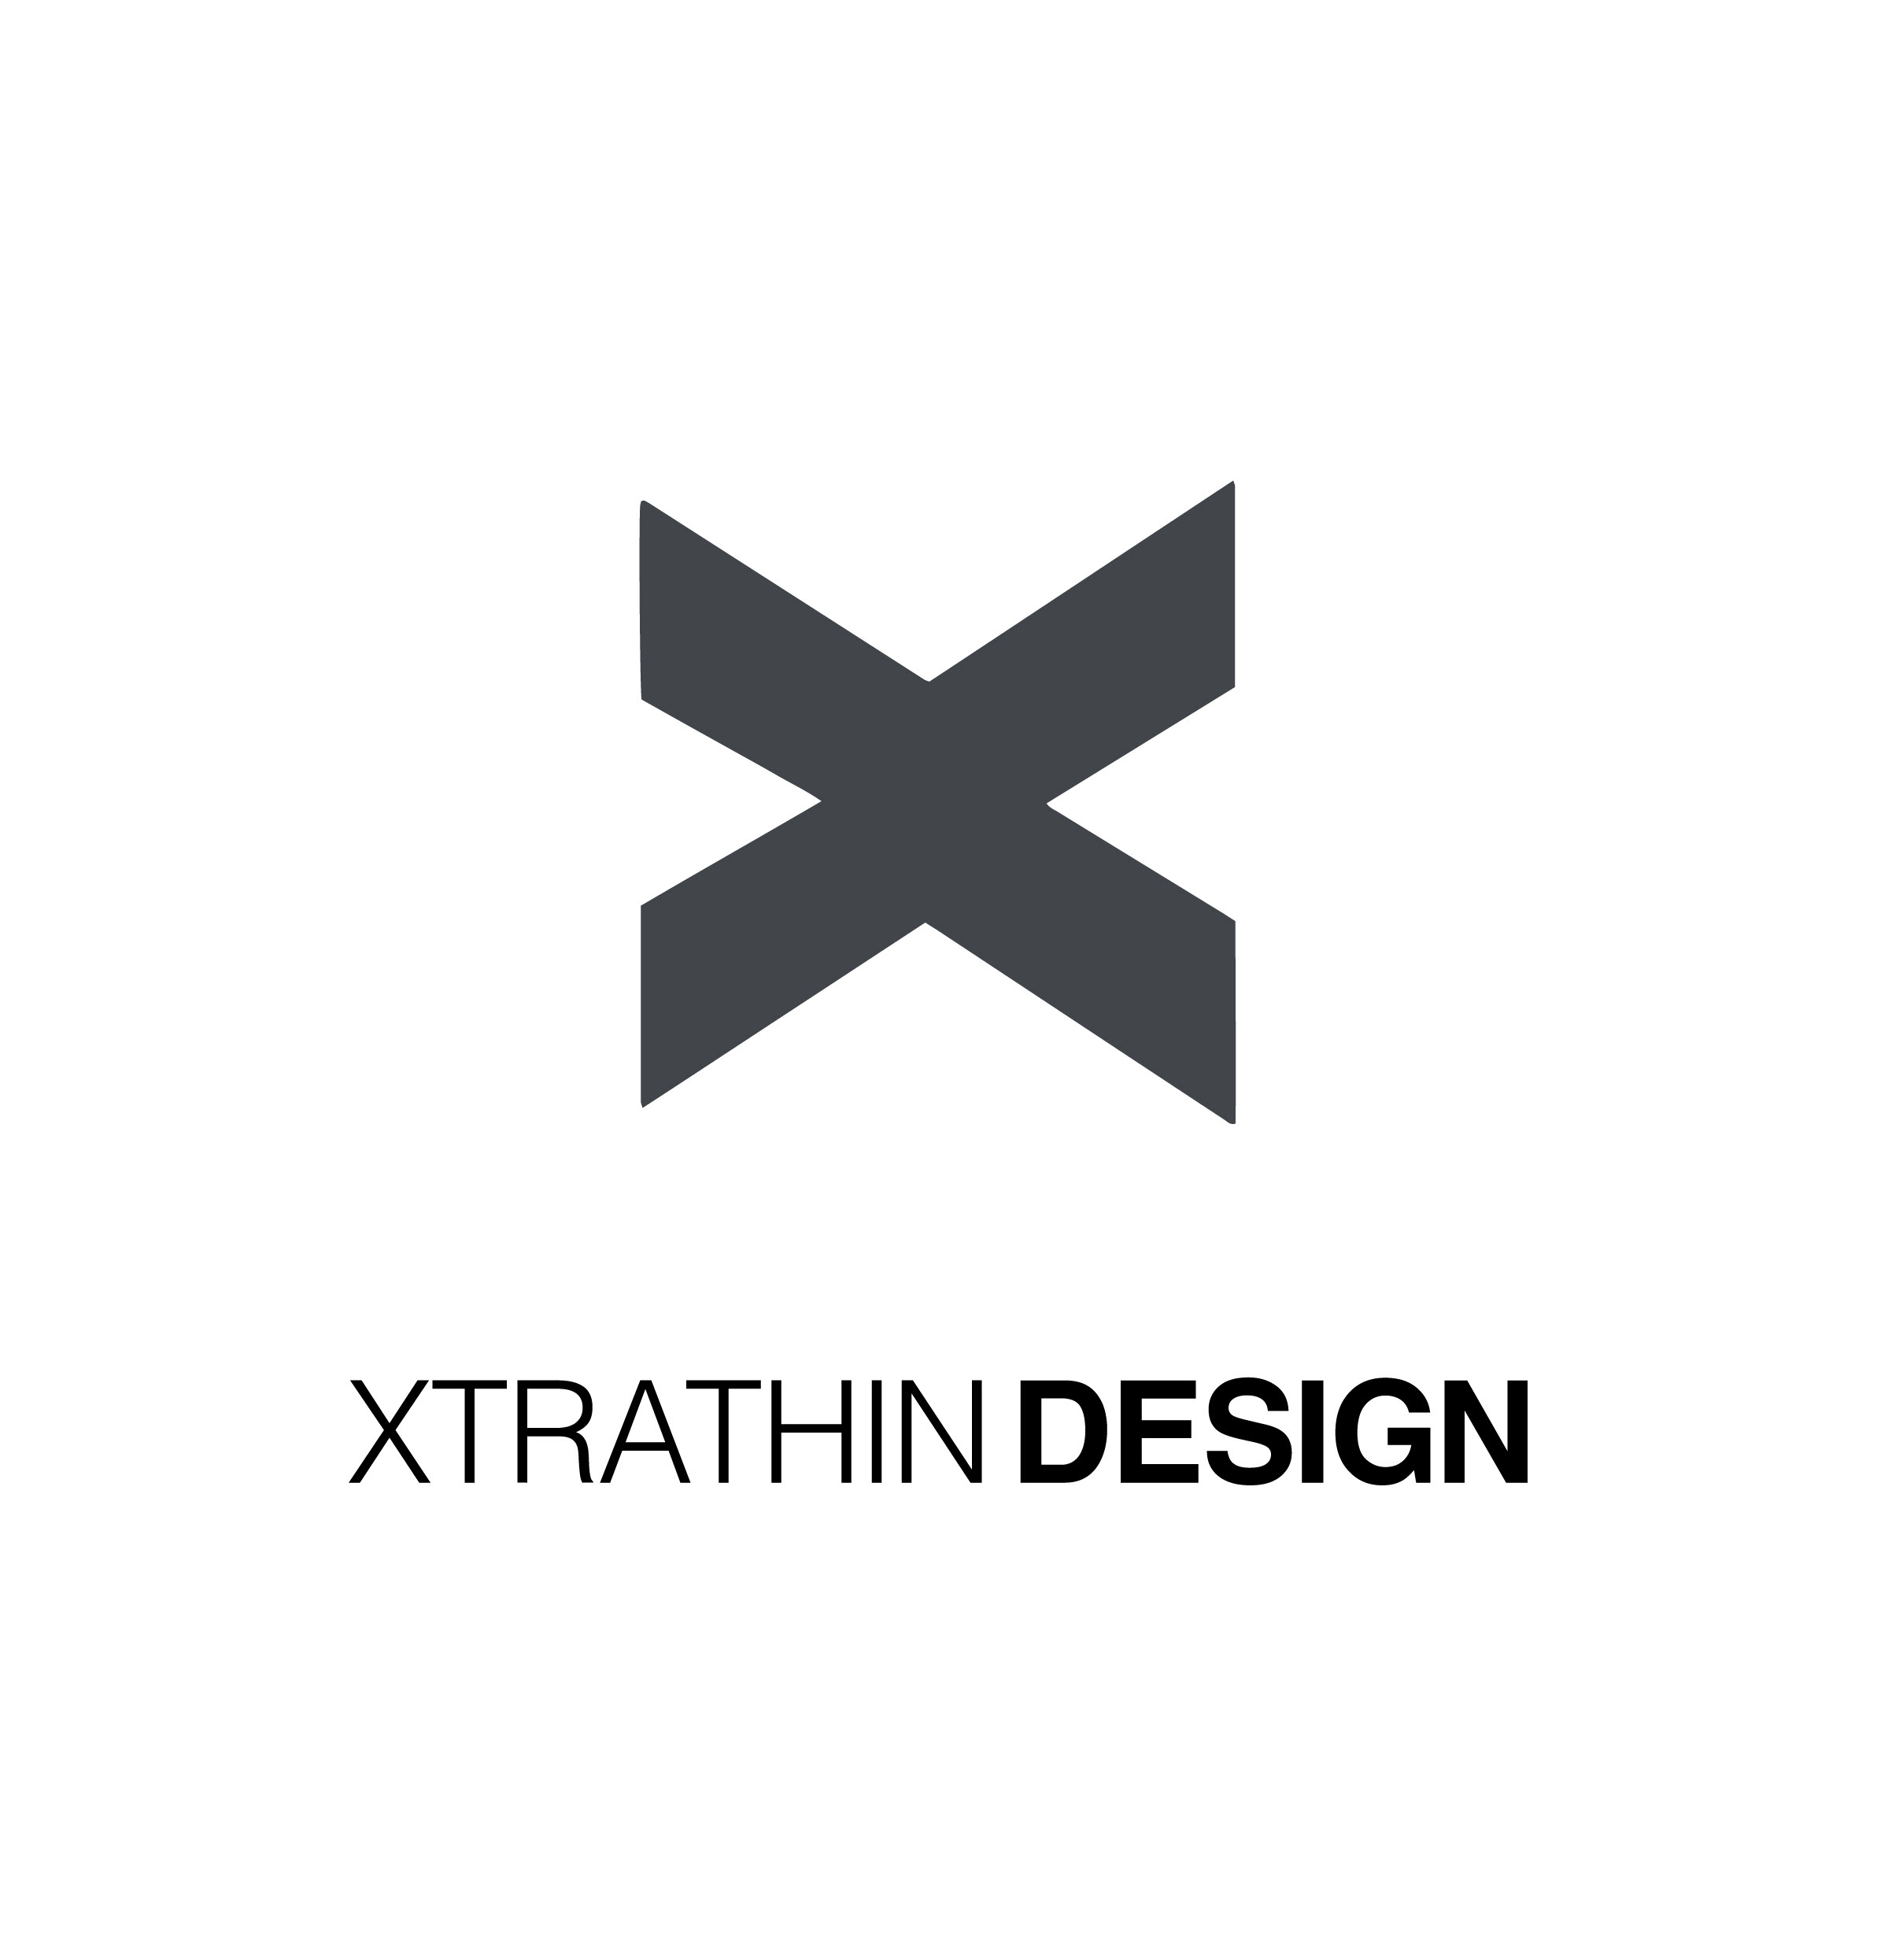 Founded in 2006 , Xtrathin Design Pvt ltd is a Mumbai-based company that specialises in designing and developing creative and innovative products. Founded by Karthikeyan Ramachandran, an artist, art curator and a designer, Karthik wears many hats. Son of legendary artist Late K.N. Ramachandran, Karthik has been at the helm of some of the most known advertising campaigns in India including times of india, Incredible india, Viacom, Amazon, Goa Tourism to name a few. Karthik is also the founder of the art gallery ‘False Ceiling’ and the art festival ‘Appa Art Fest’. His paintings blend the future with the past, culture with context and real with the imaginary. Xtrathin, has been part of some iconic campaigns for brands which include Animation, Graphics and shoot based work. Brands like UTV, Mtv and Miko were among a few retainer clients. Xtrathin designed the identity for Cinemas of India, Film Bazaar and India Pavillion at Cannes film festival 3 years in a row. We have also done publicity creatives for over 40 feature films. In terms of Image Identity, we were the design house which created the identity for Vh1 India in their launch year. We also have an animation team & we have produced over 30 animated ad films & title sequences for movies in various cutting edge styles The last 2 projects done for Goa & Gujarat tourism .